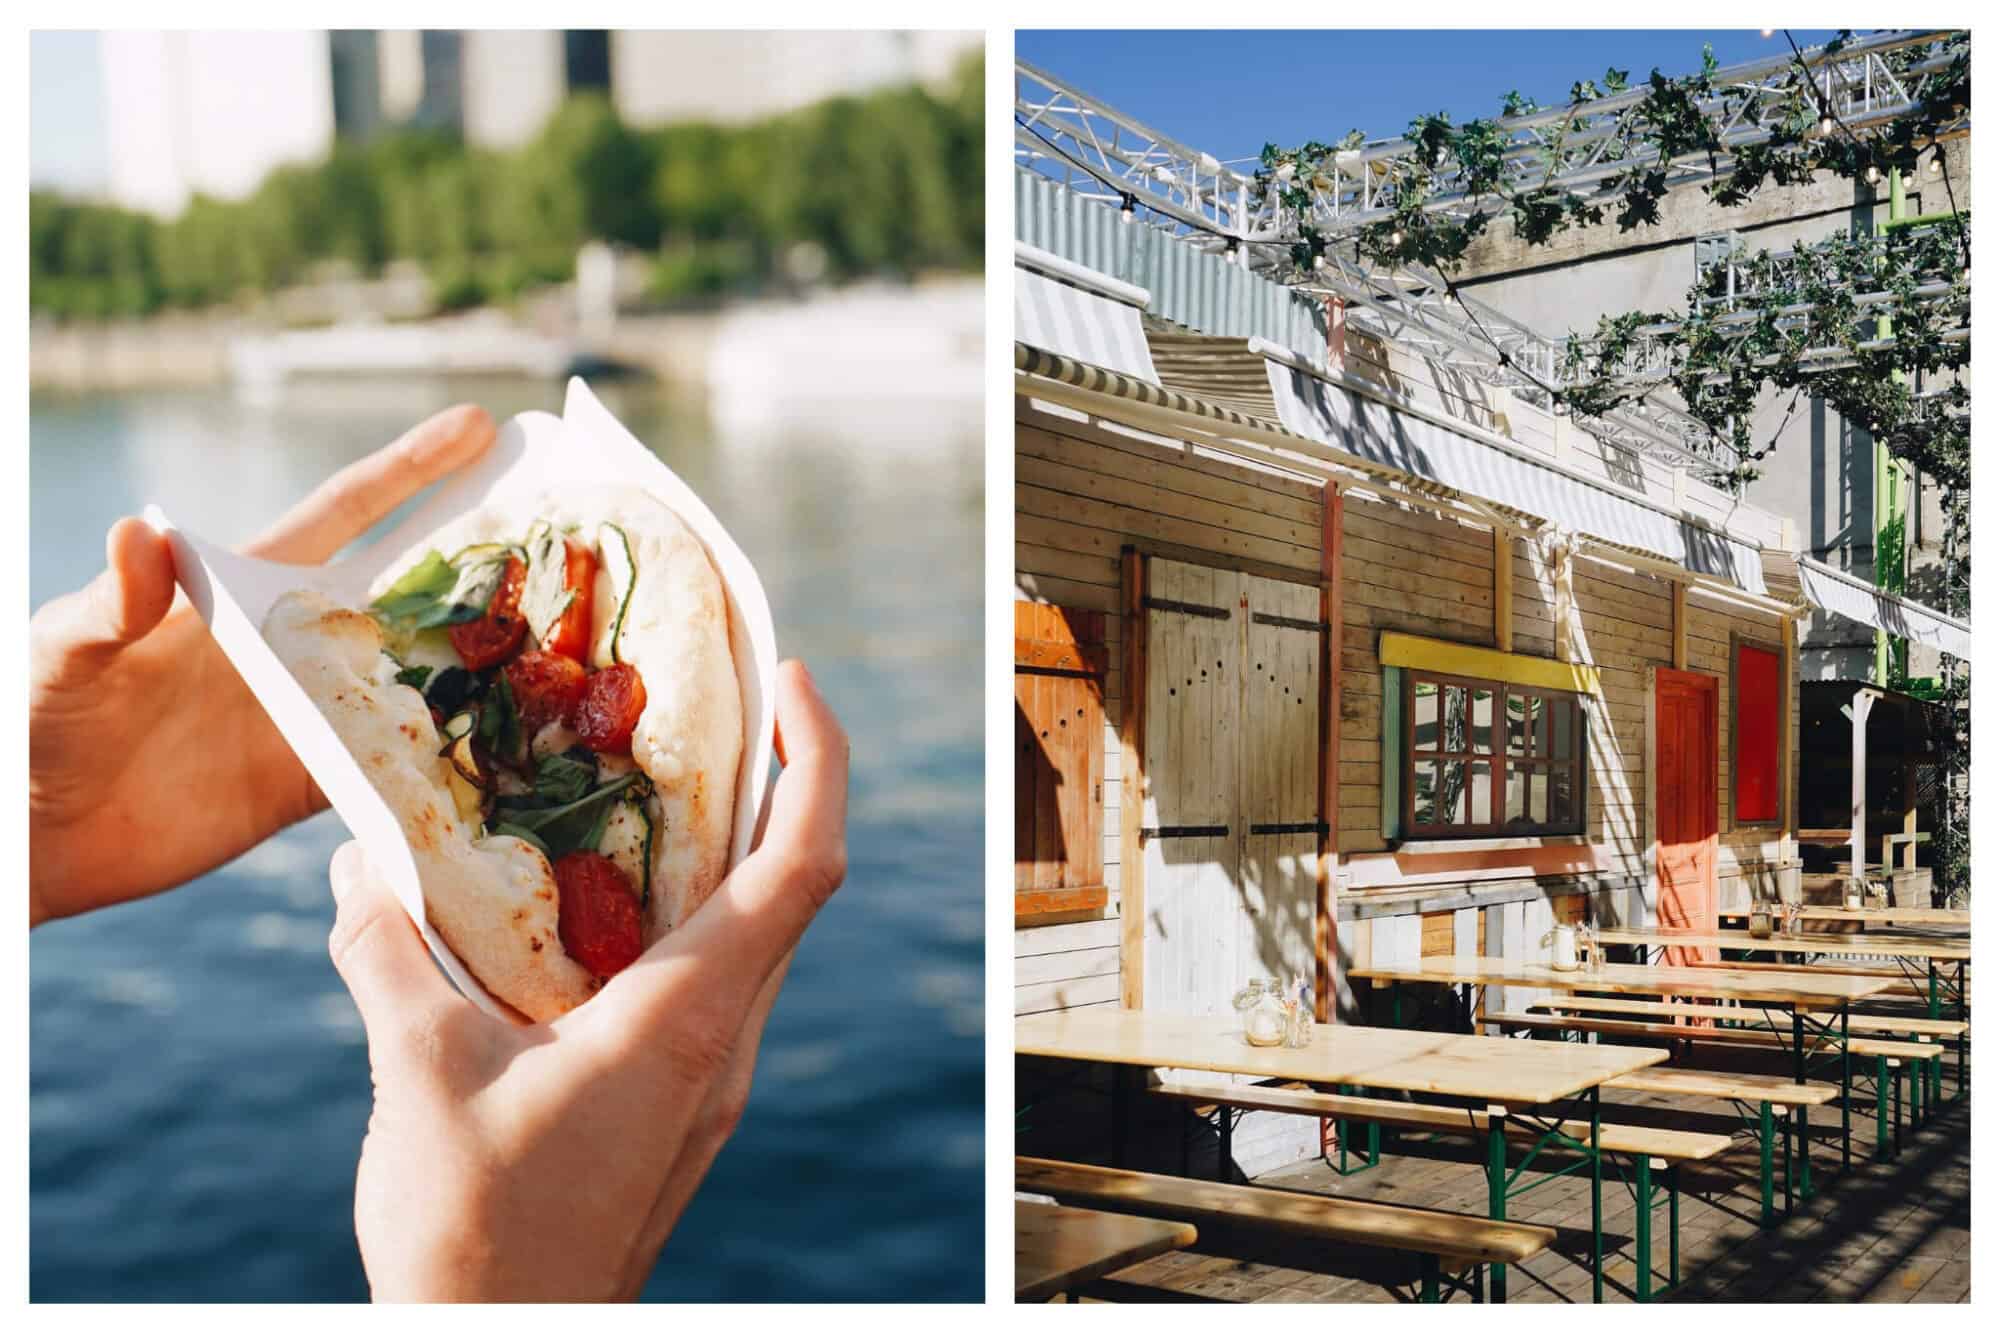 Left: a person's hands holding a pita bread stuffed with tomatoes and basil with the Seine in the background. Right: the wooden terrace with wooden bench seats at Wanderlust Street Food, a bar in Paris.